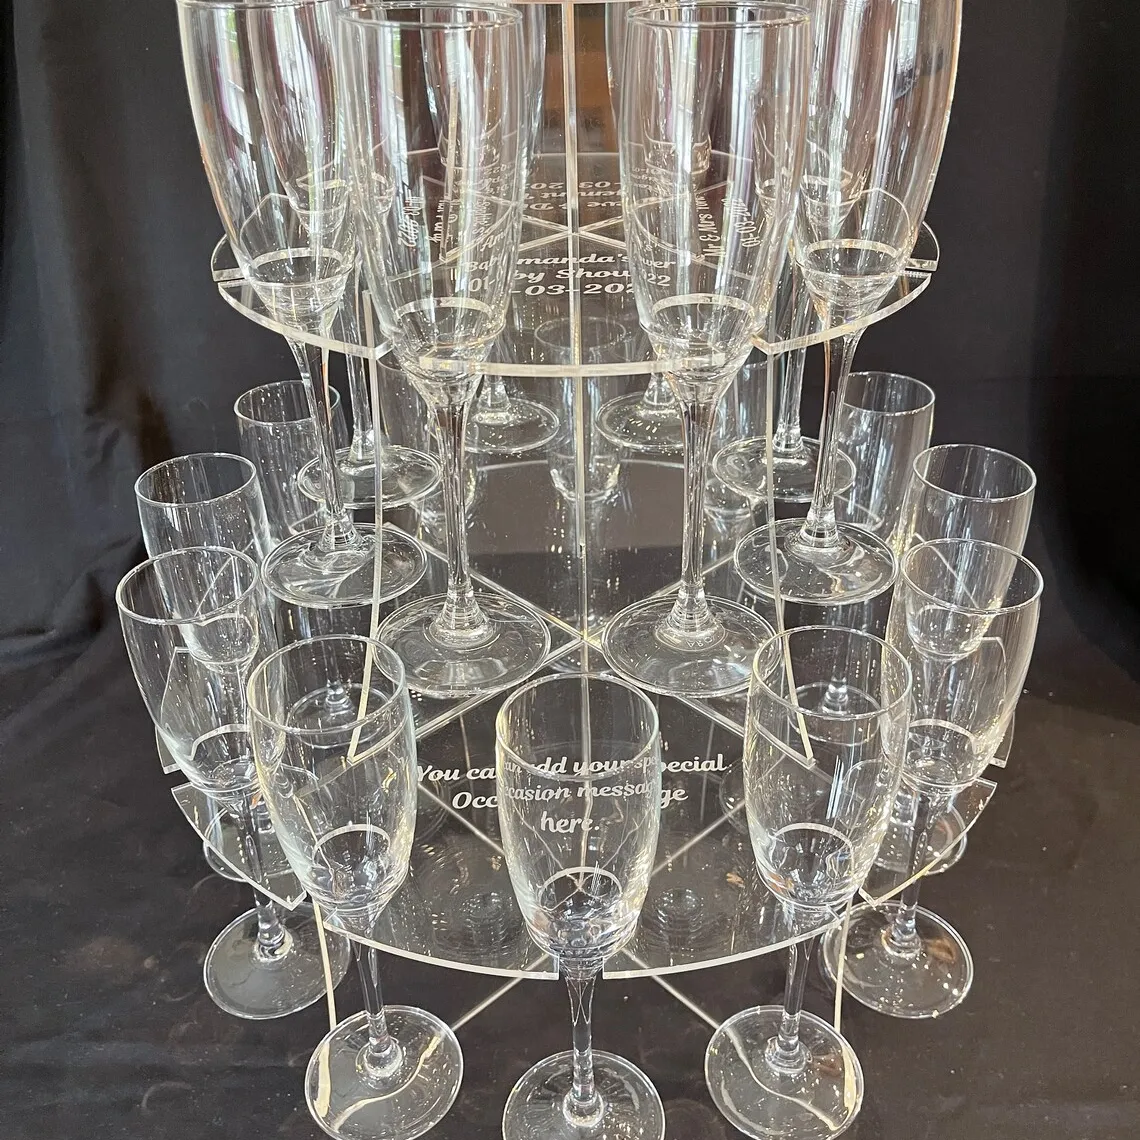 Yageli Groothandel Clear 3 Tiers Champagne/Prosecco Display Stand Toren Acryl Prosecco Display Stand